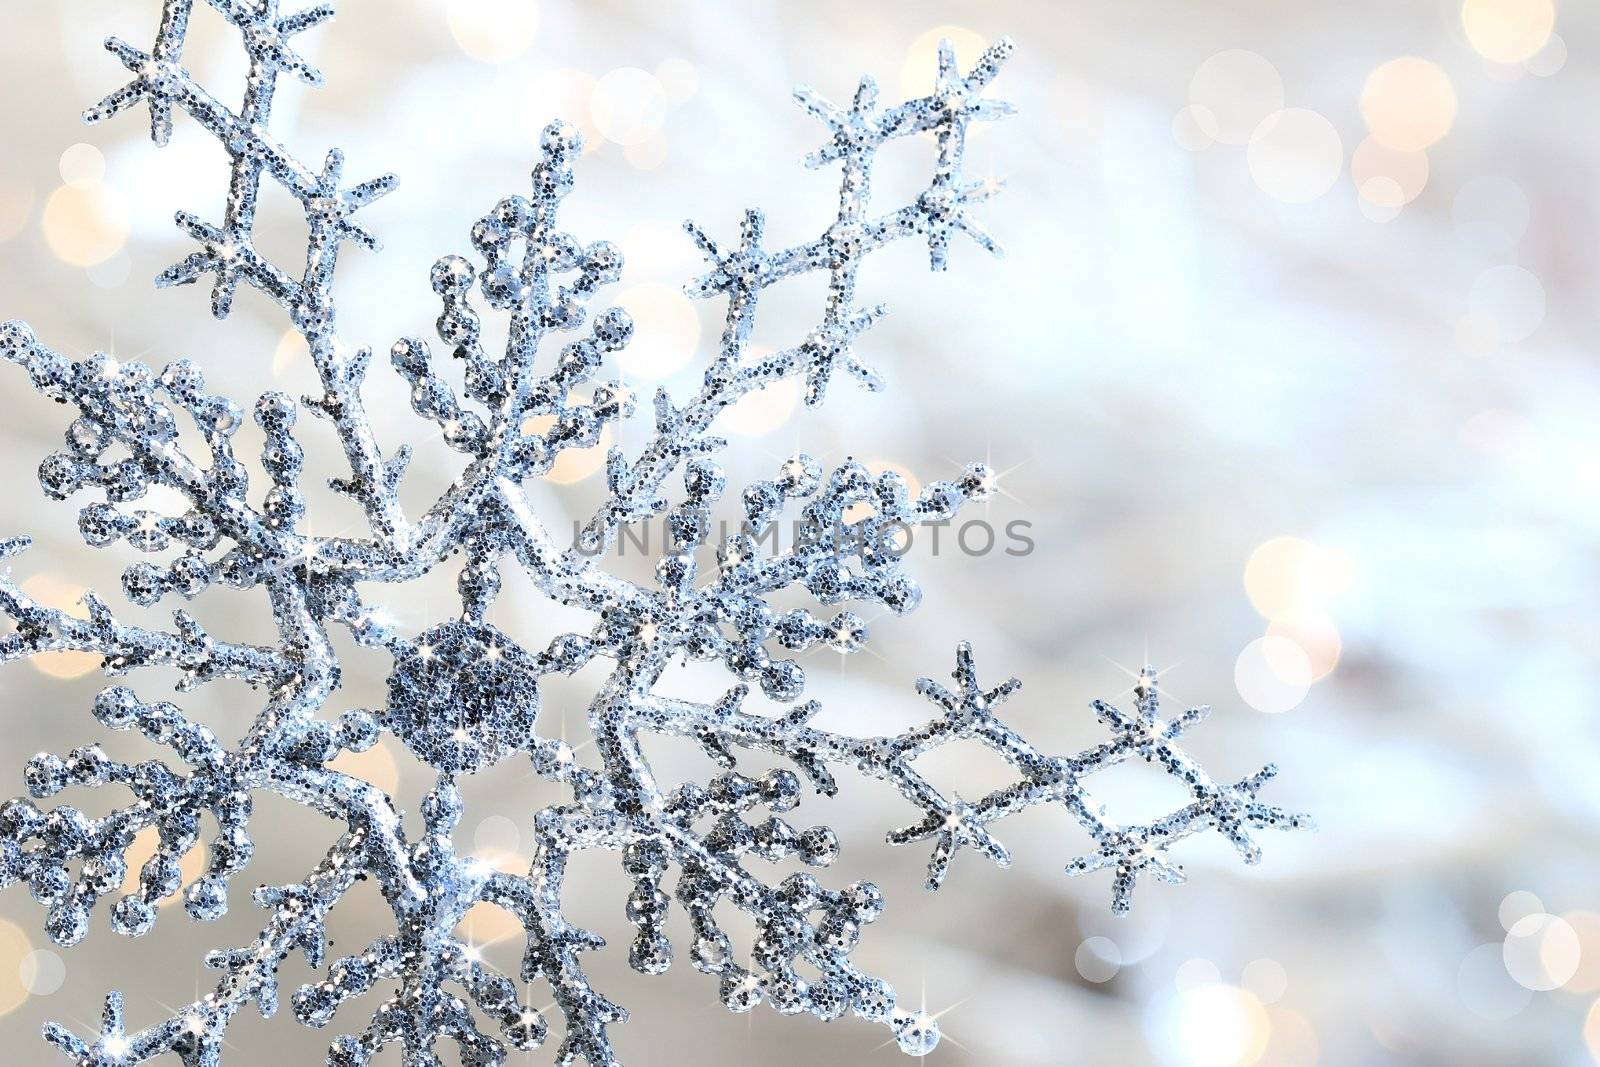 Silver blue snowflake against a shimmering background against a shimmering background